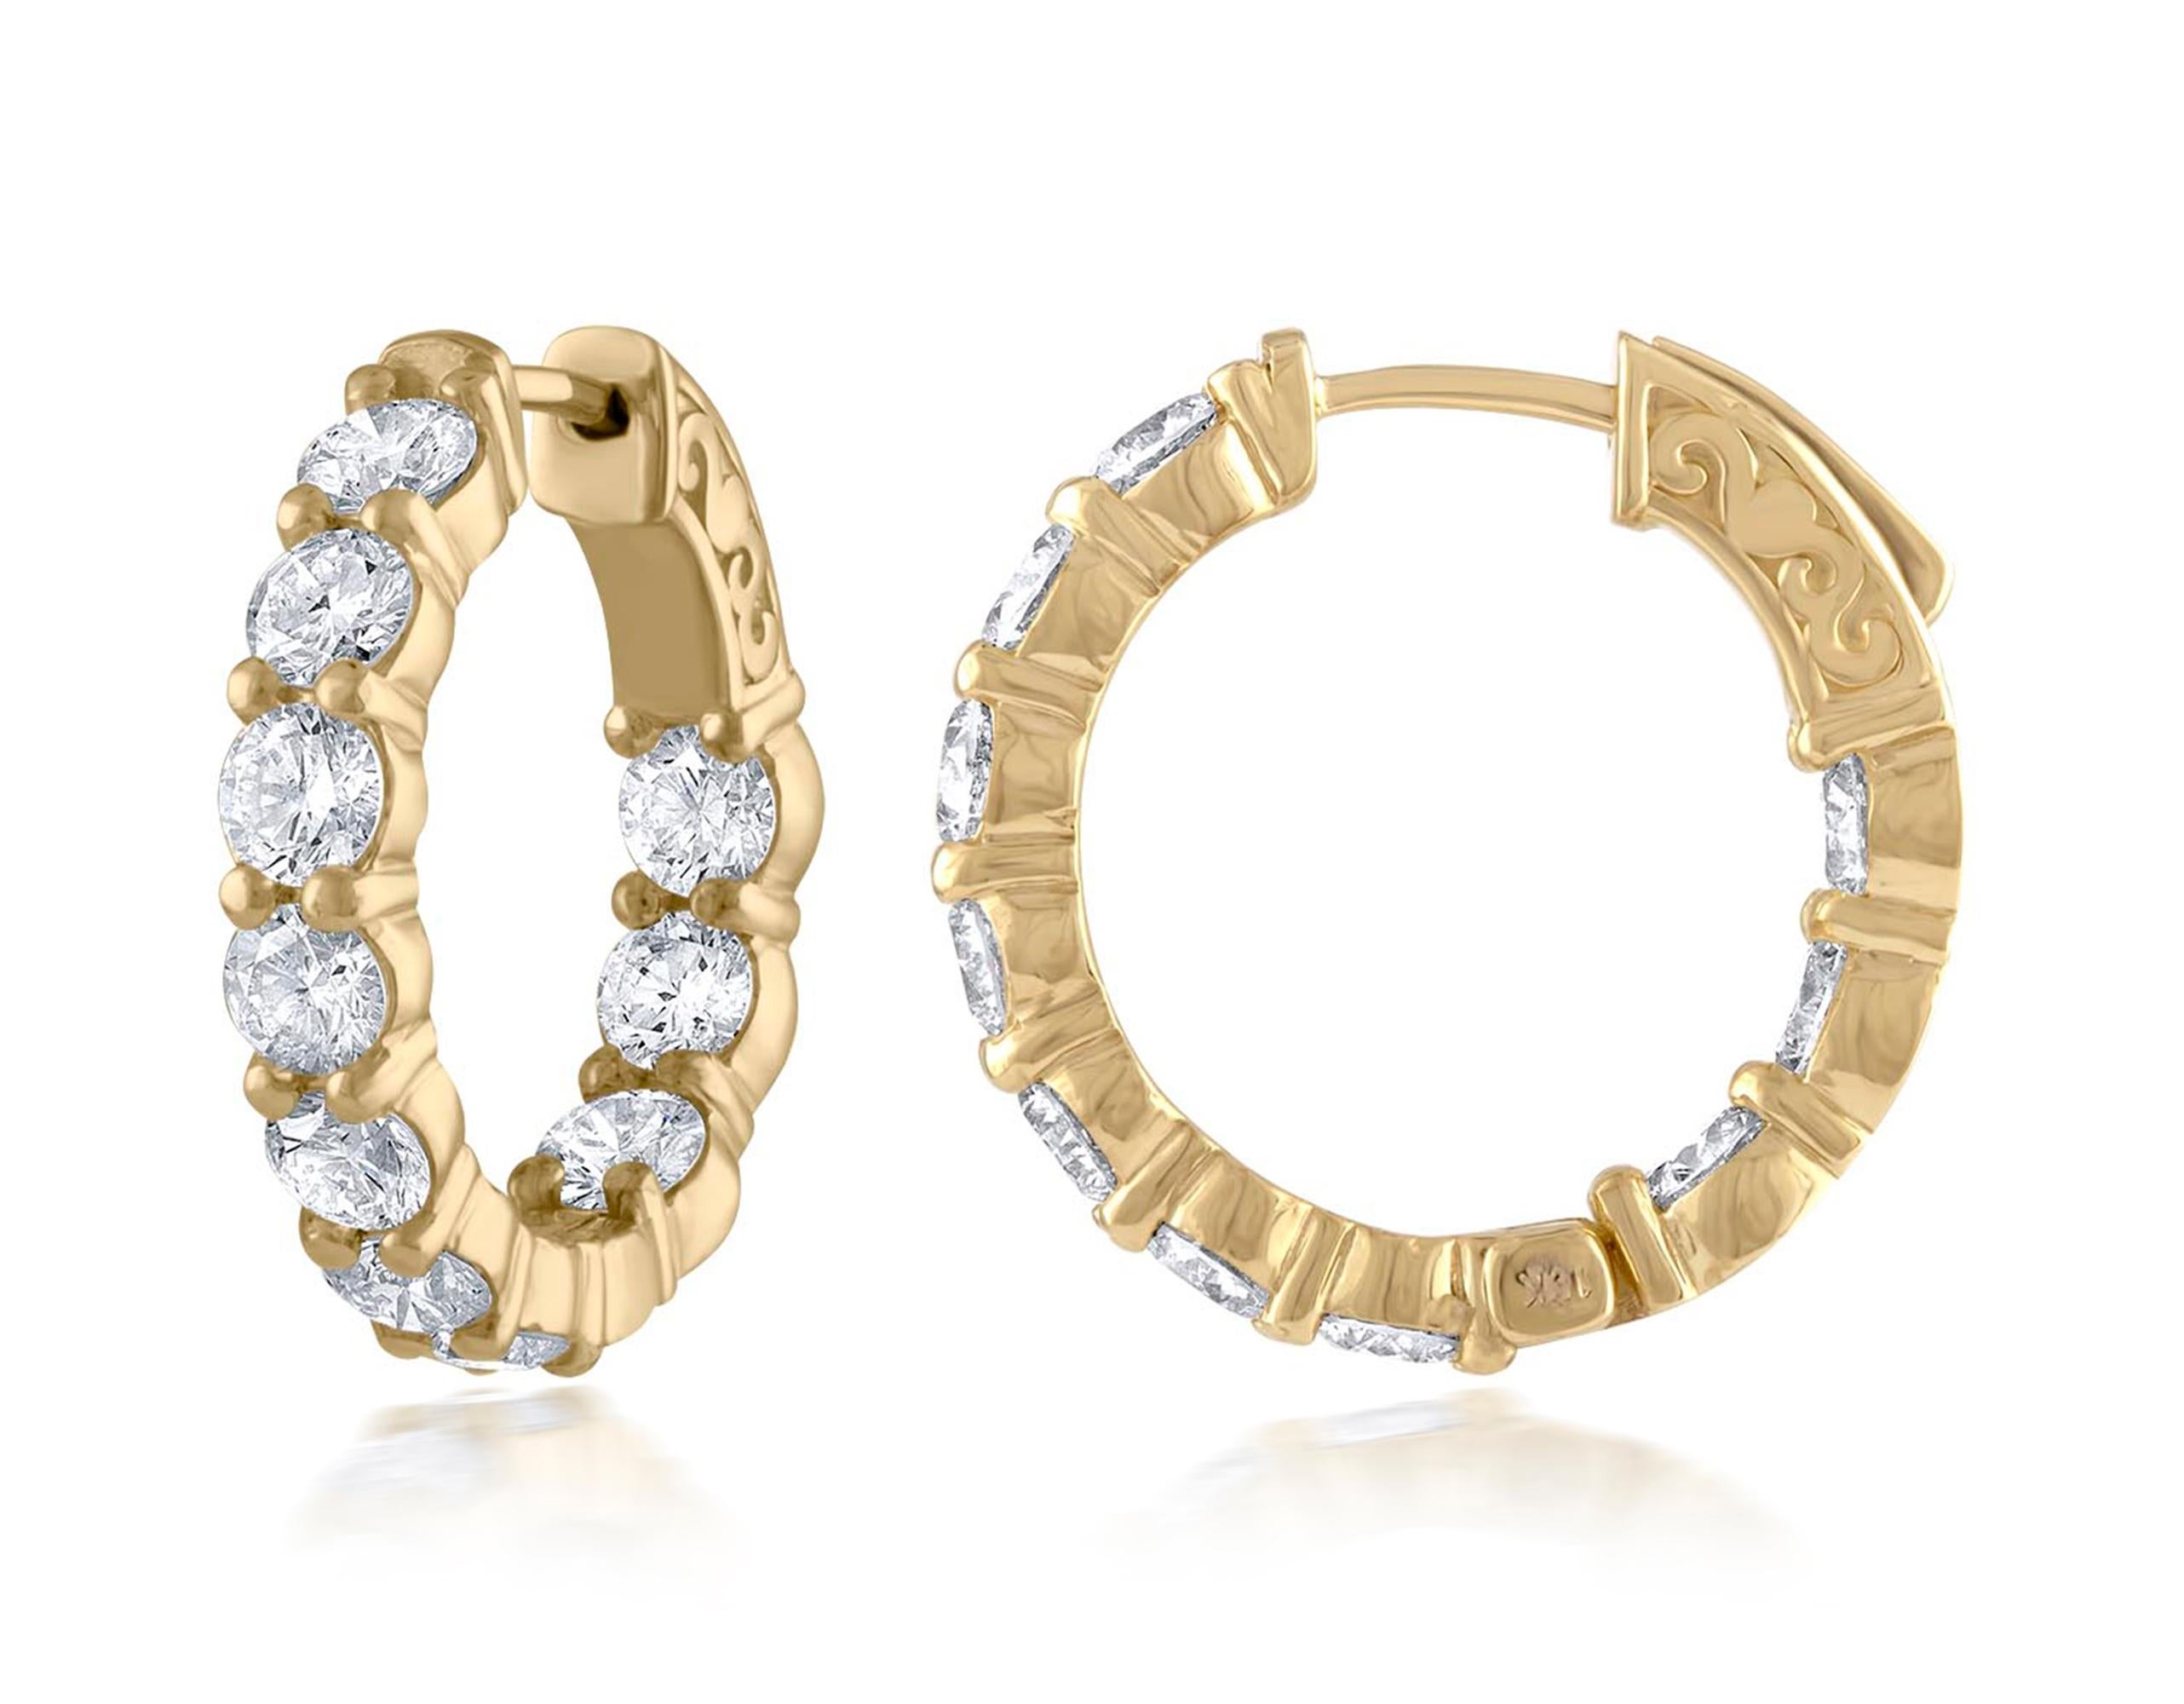   Diana M. 18kt yellow gold diamond hoops containing 4.30 cts tw of round diamonds (20 stones) measuring 0.75